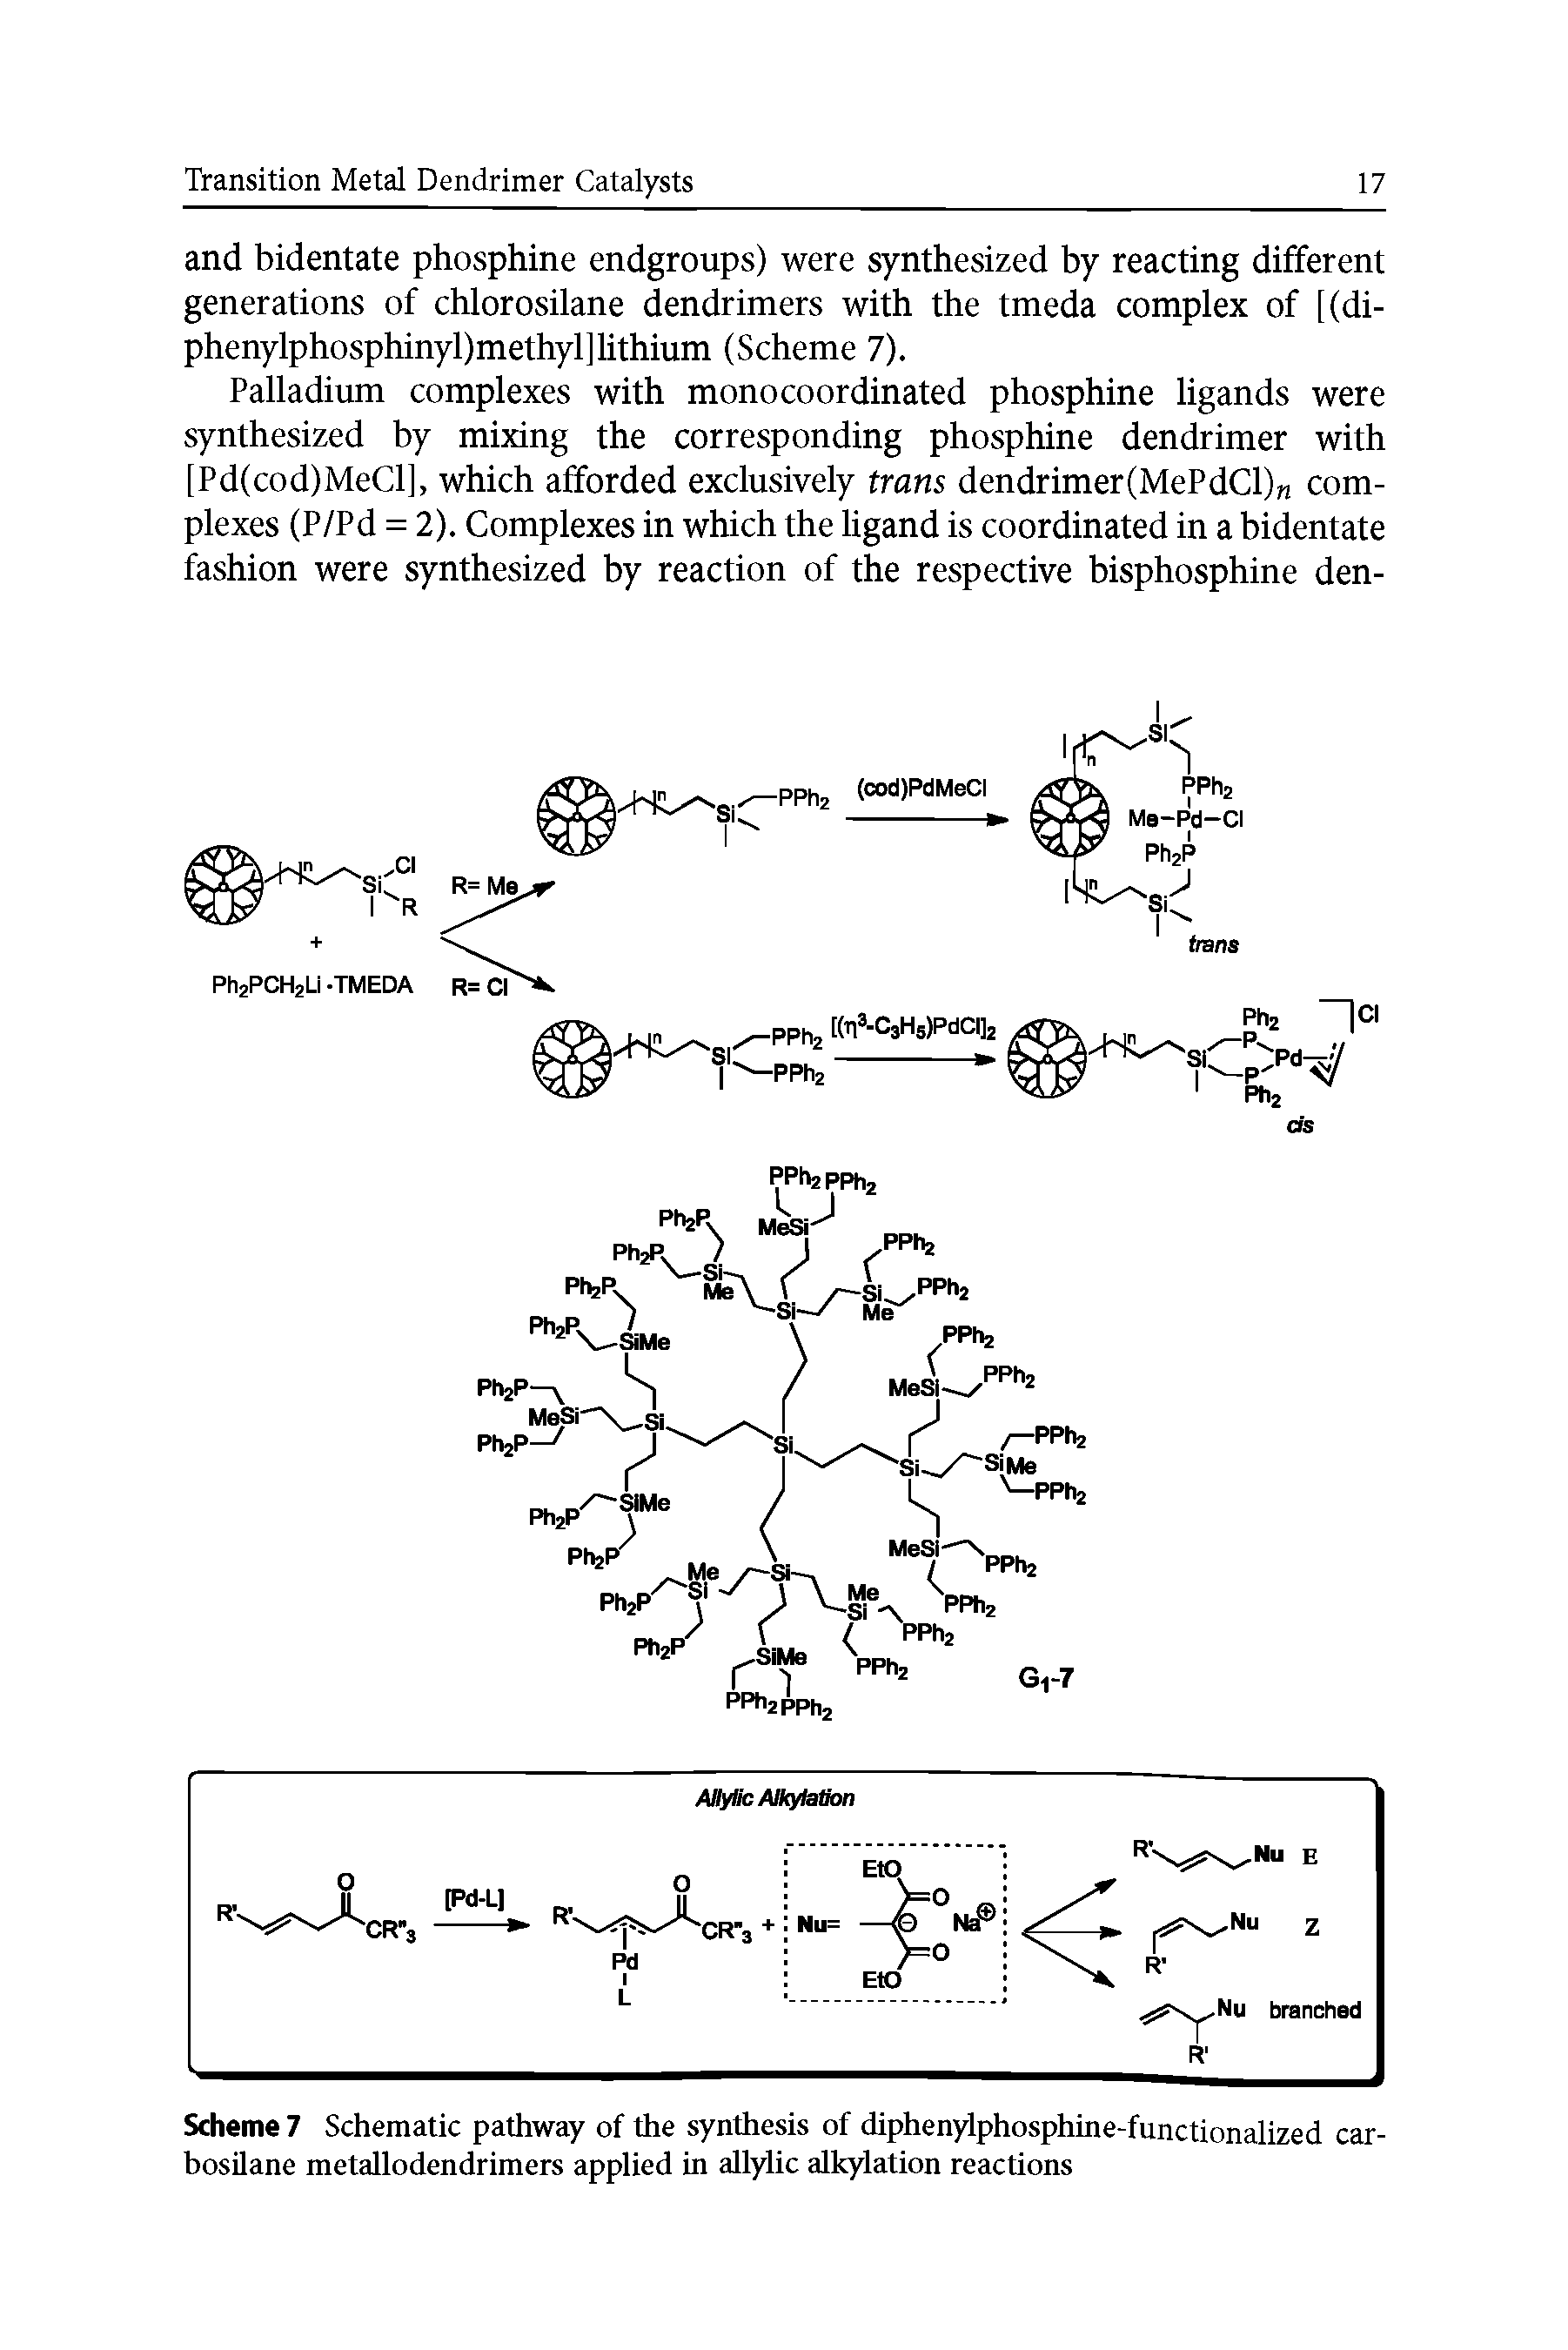 Scheme 7 Schematic pathway of the synthesis of diphenylphosphine-functionalized car-bosilane metallodendrimers applied in allylic alkylation reactions...